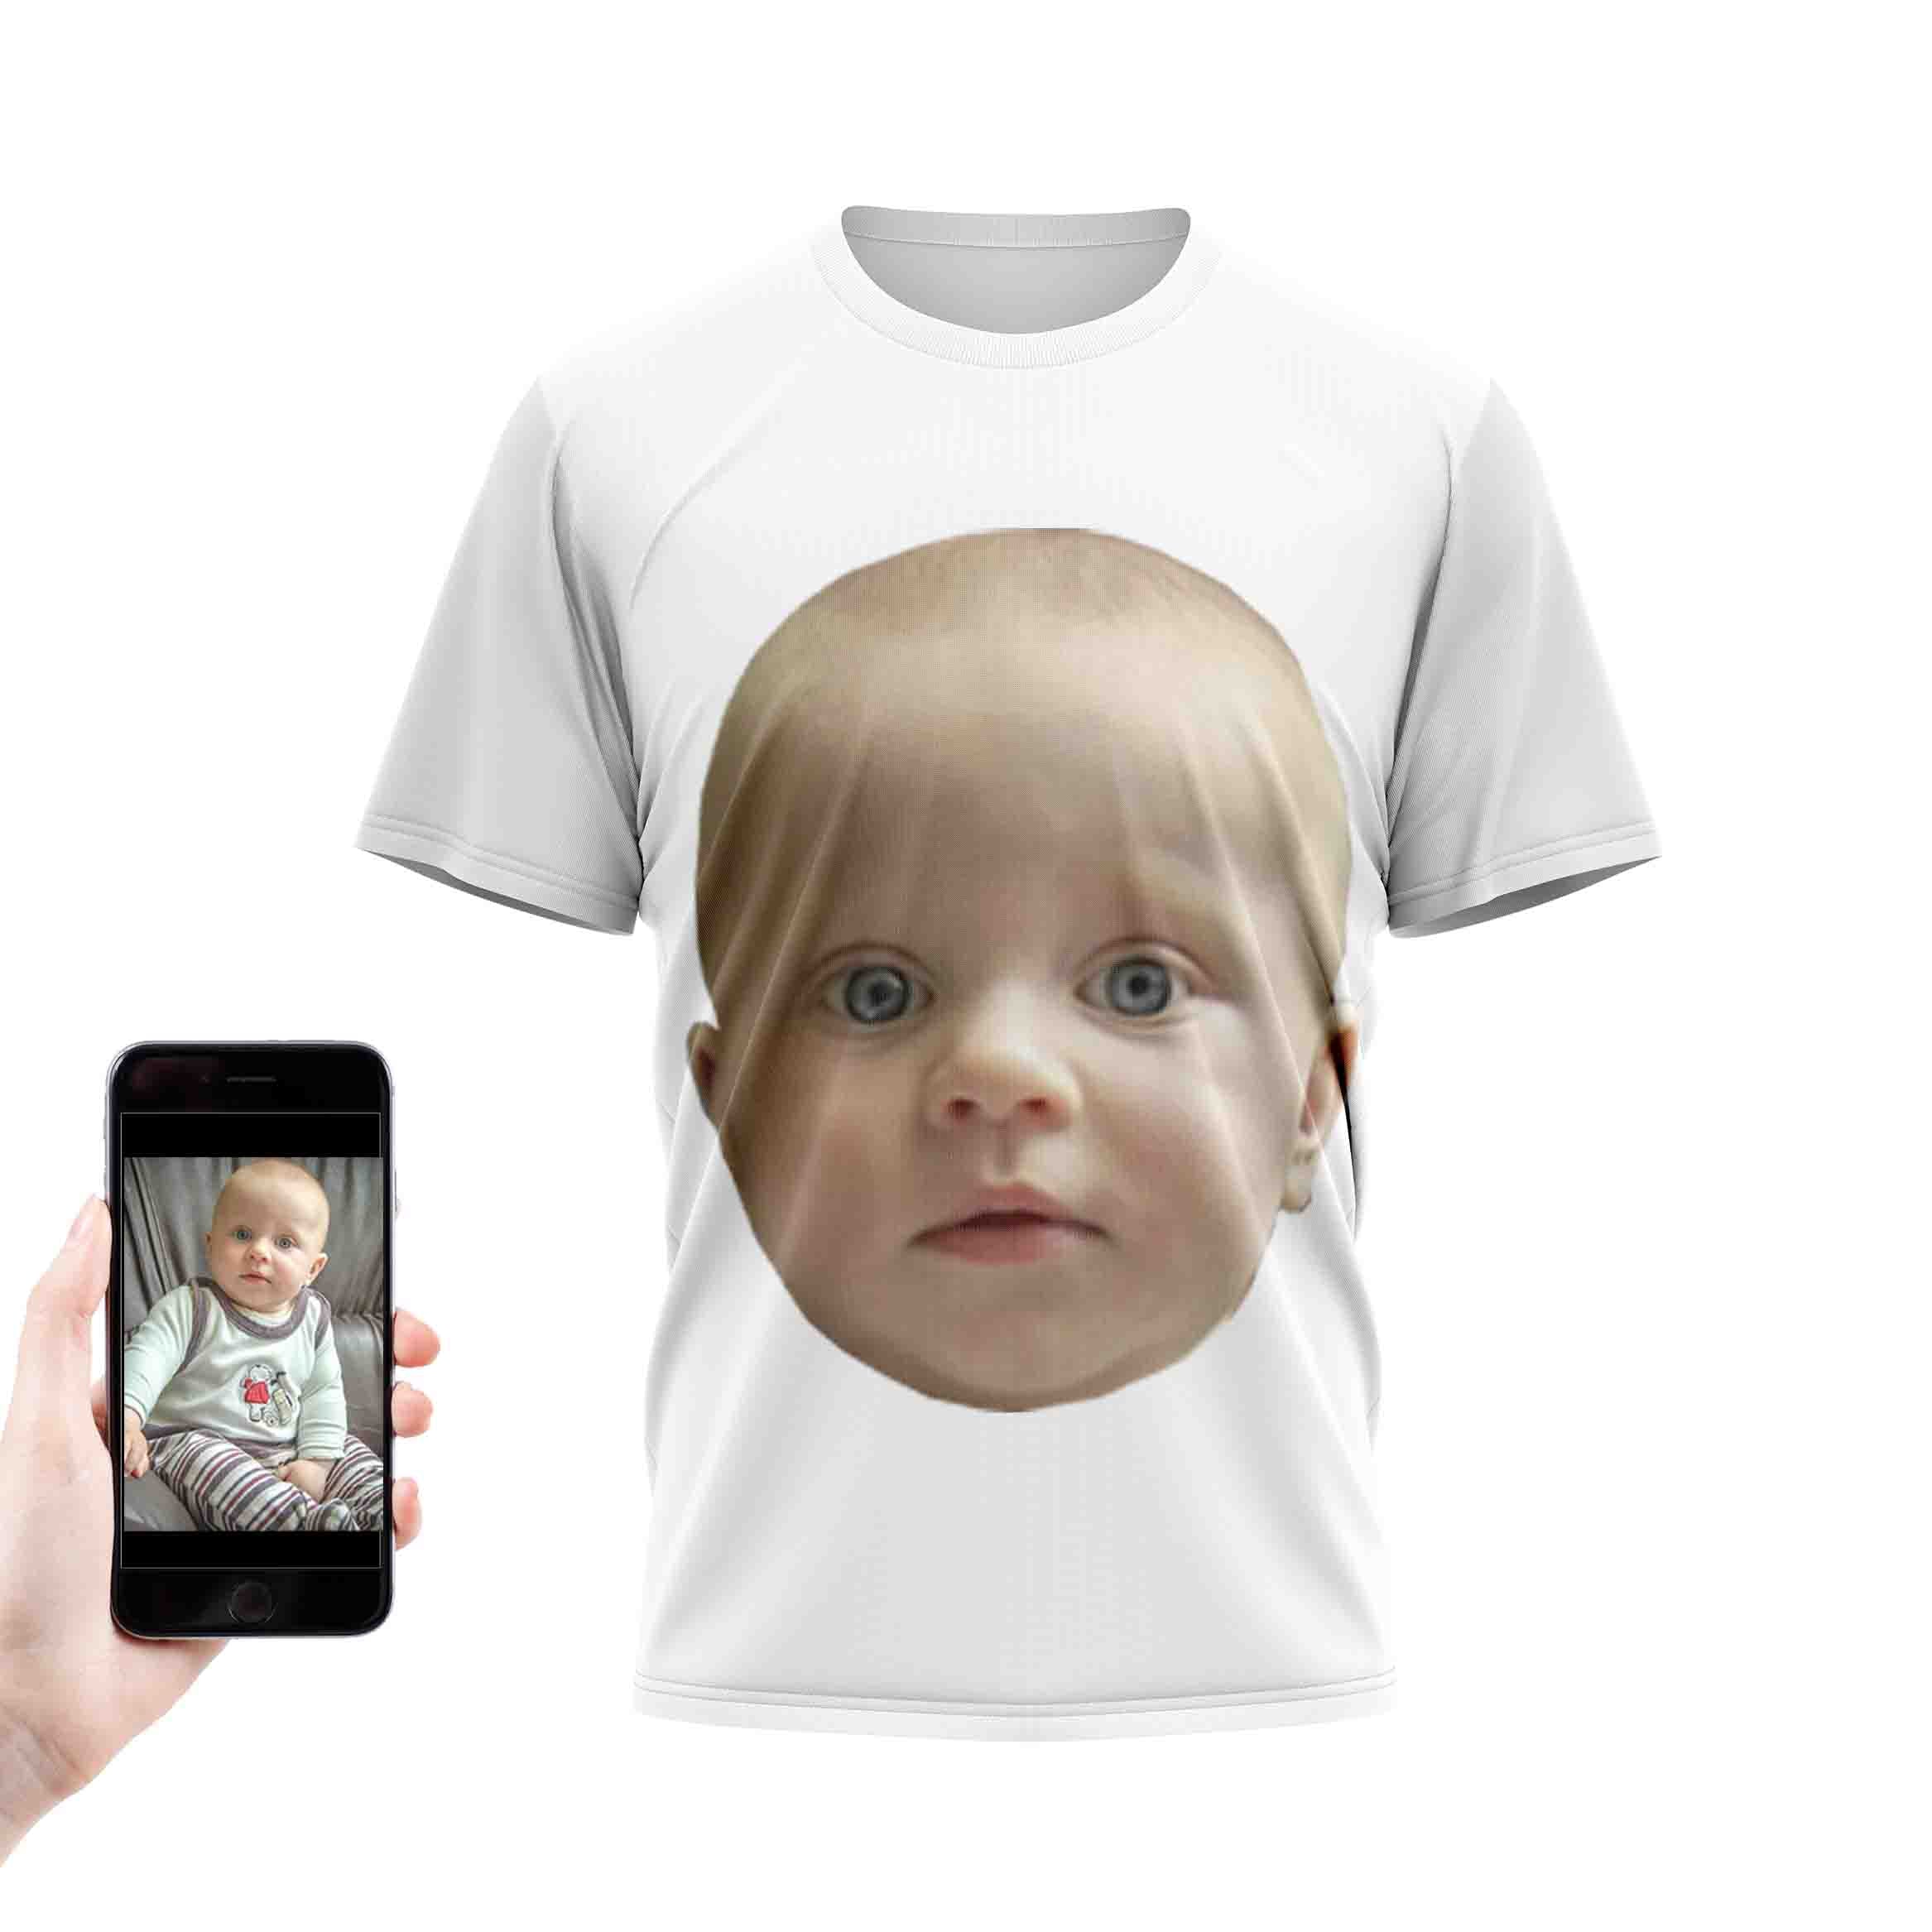 Customisable T-Shirt - We Print Faces From Your Uploaded Photo! – InkTree